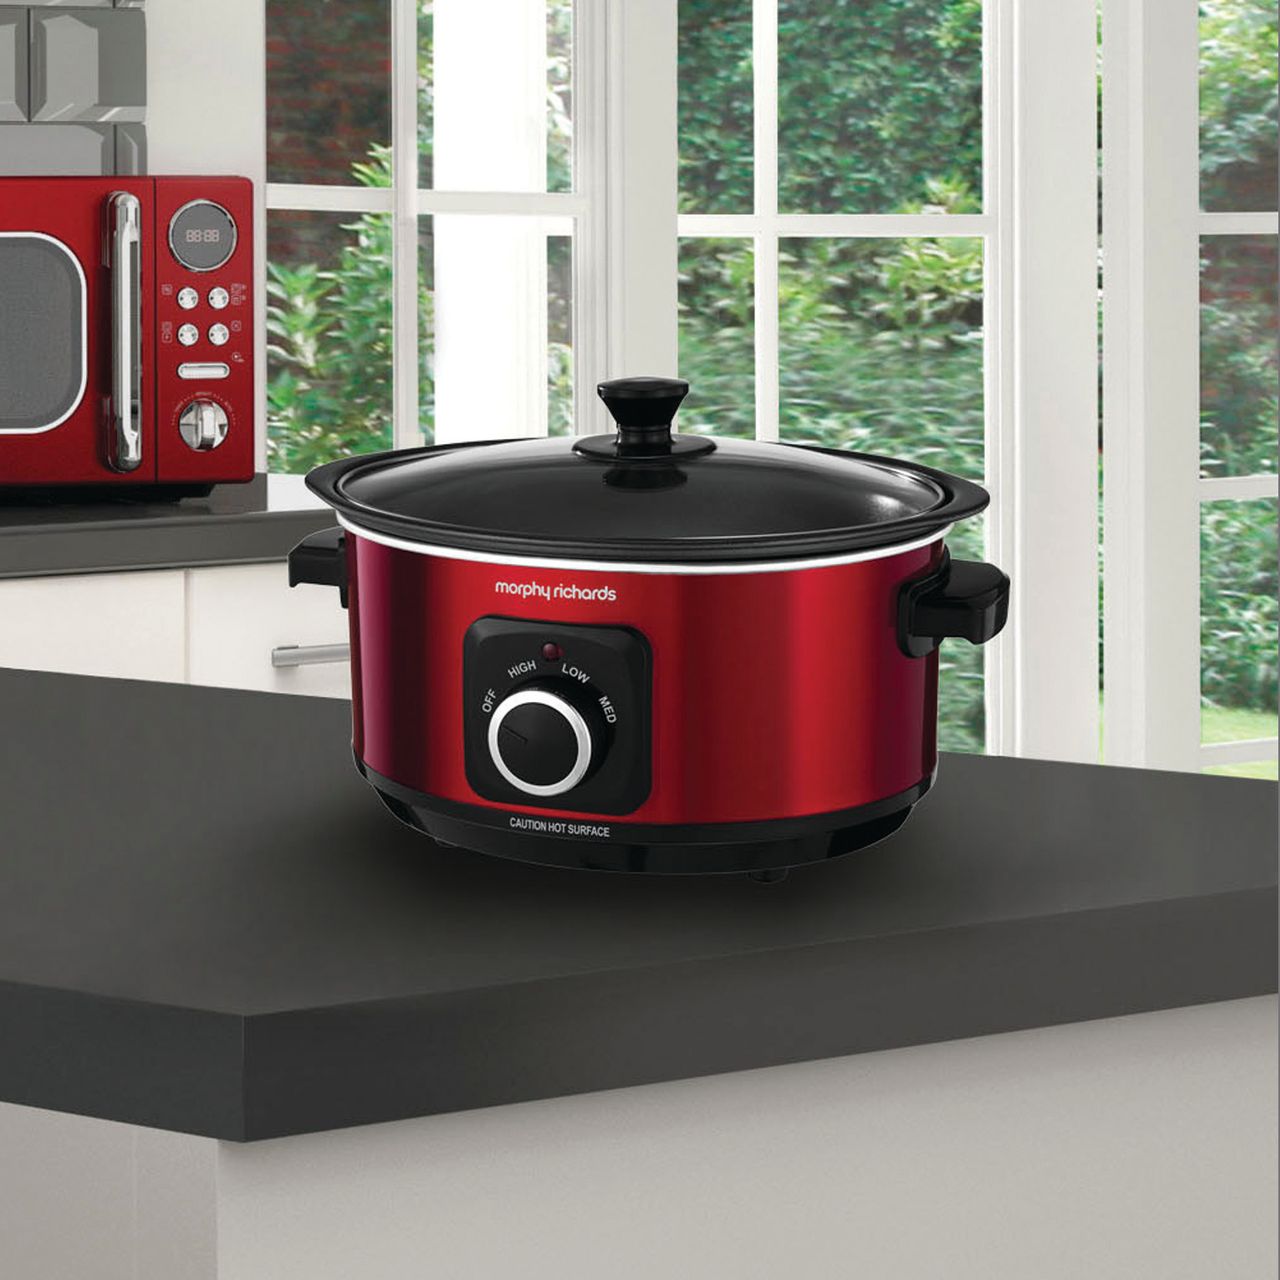 Morphy Richards Morphy Richards 460014 Evoke Sear And Stew Slow Cooker 3.5 Litres 163 Watt Red 